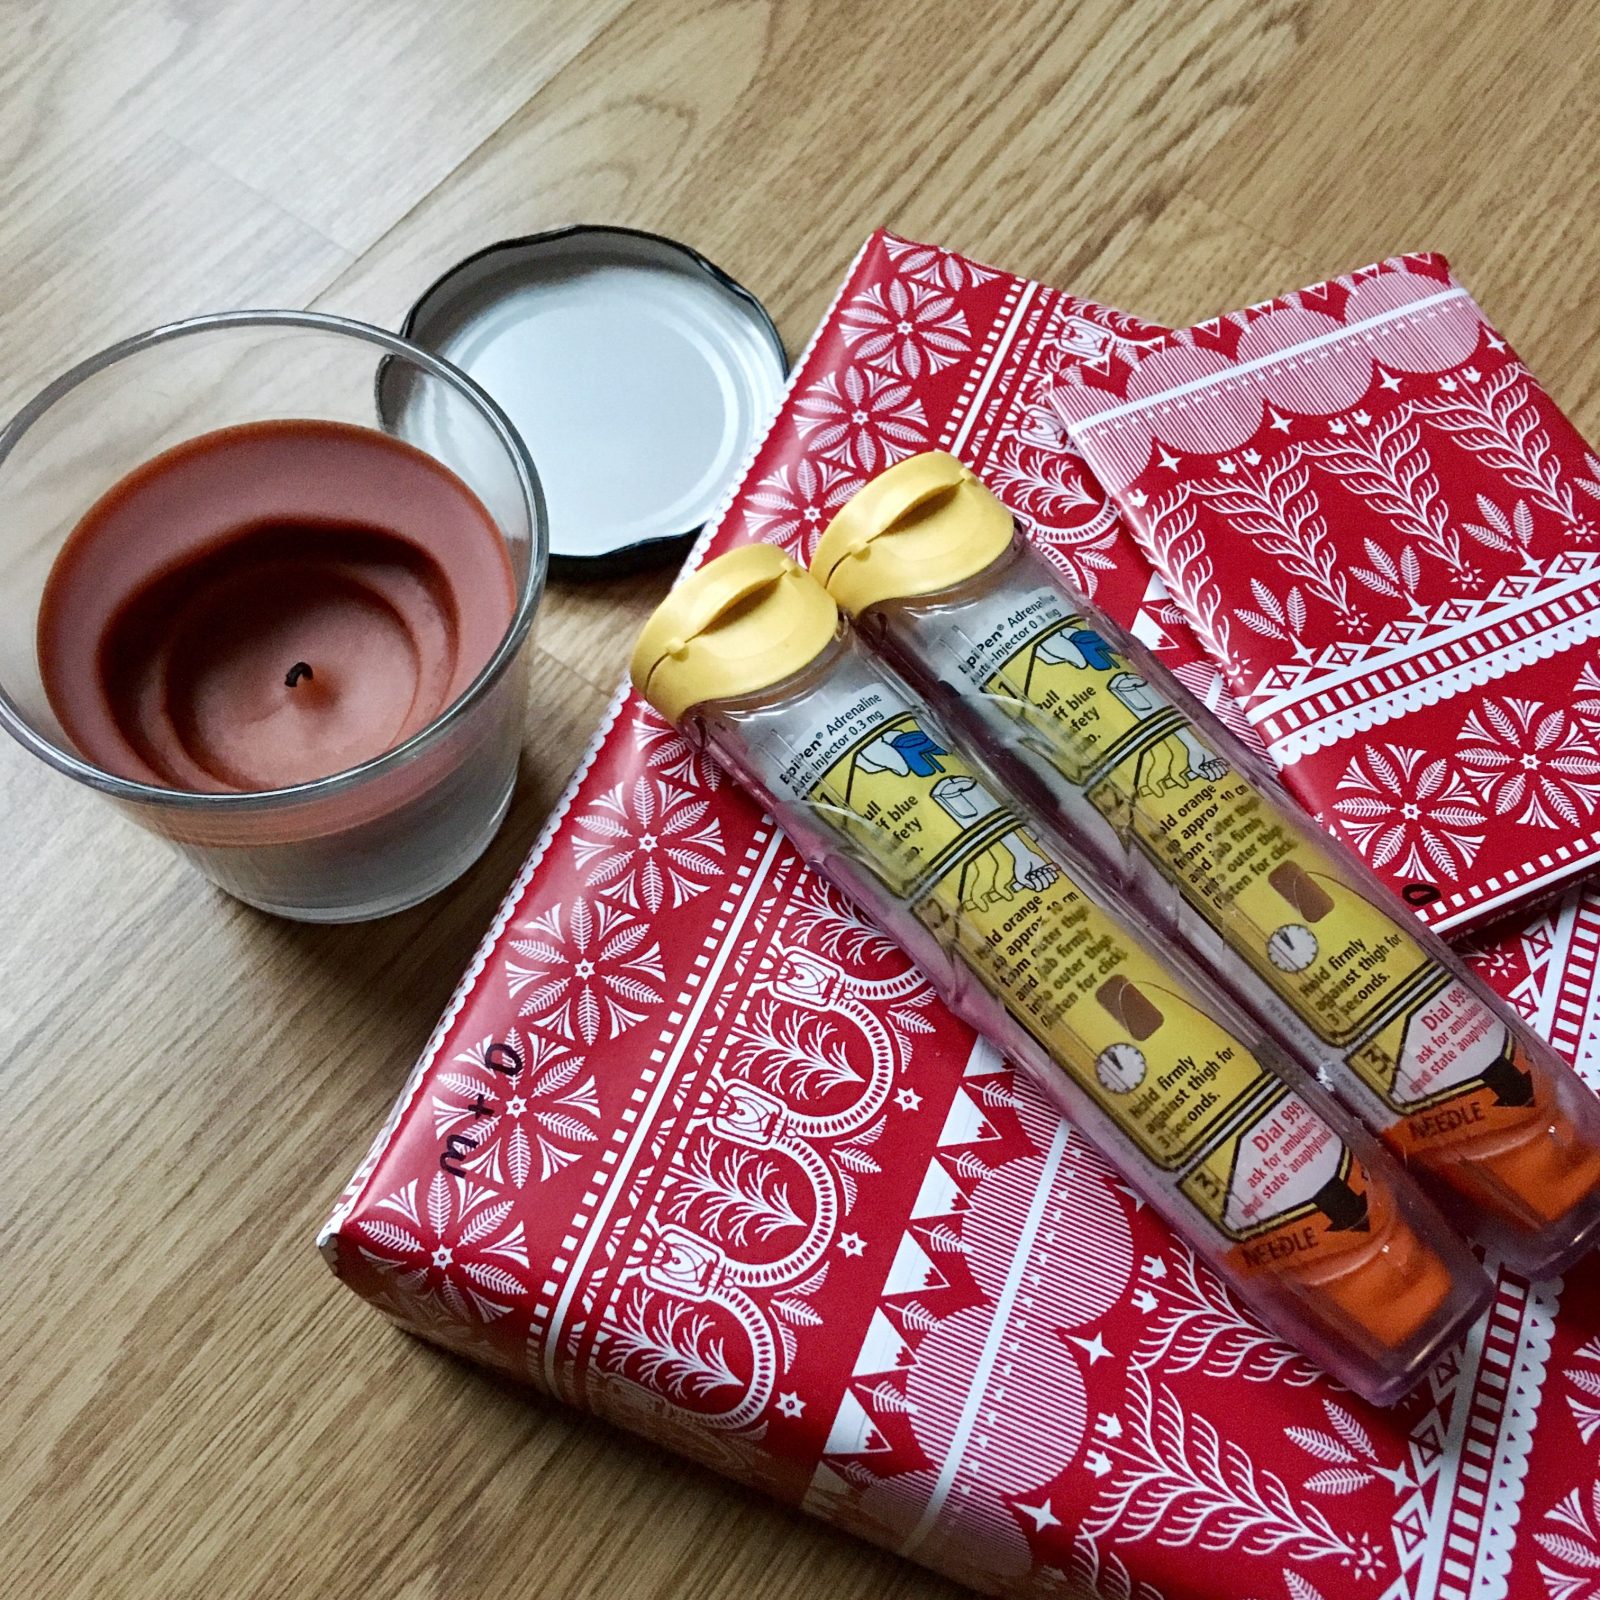 flatlay of epipens on top of presents in red wrapping paper, next to red festive candle